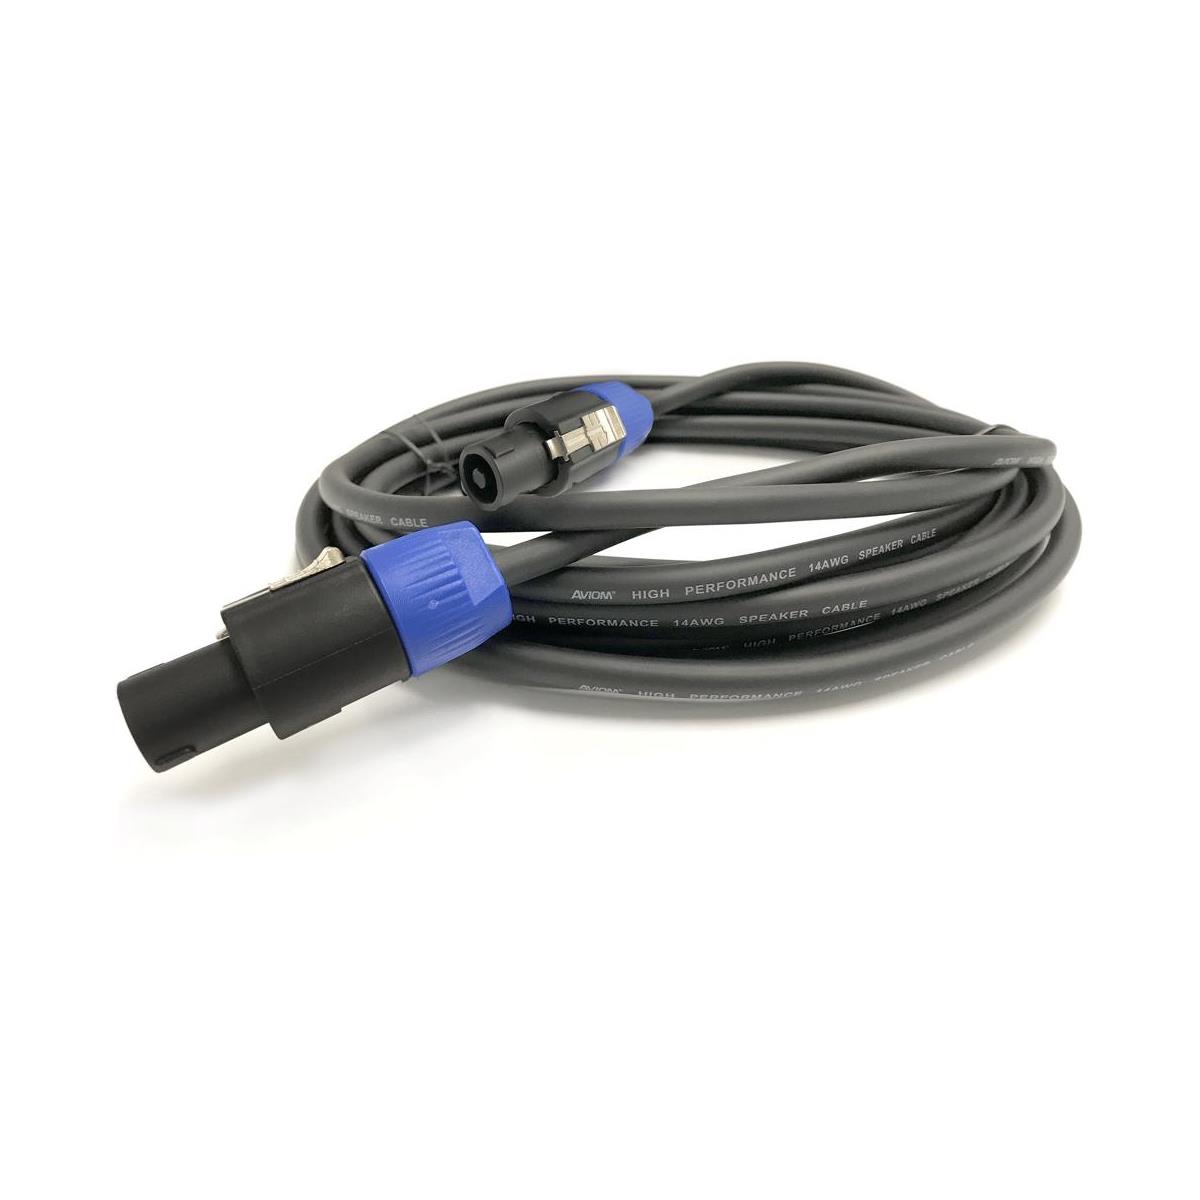 Image of Aviom SPK-5 5m 14AWG Speaker Cable with Locking Connectors for BOOM-1 Processor